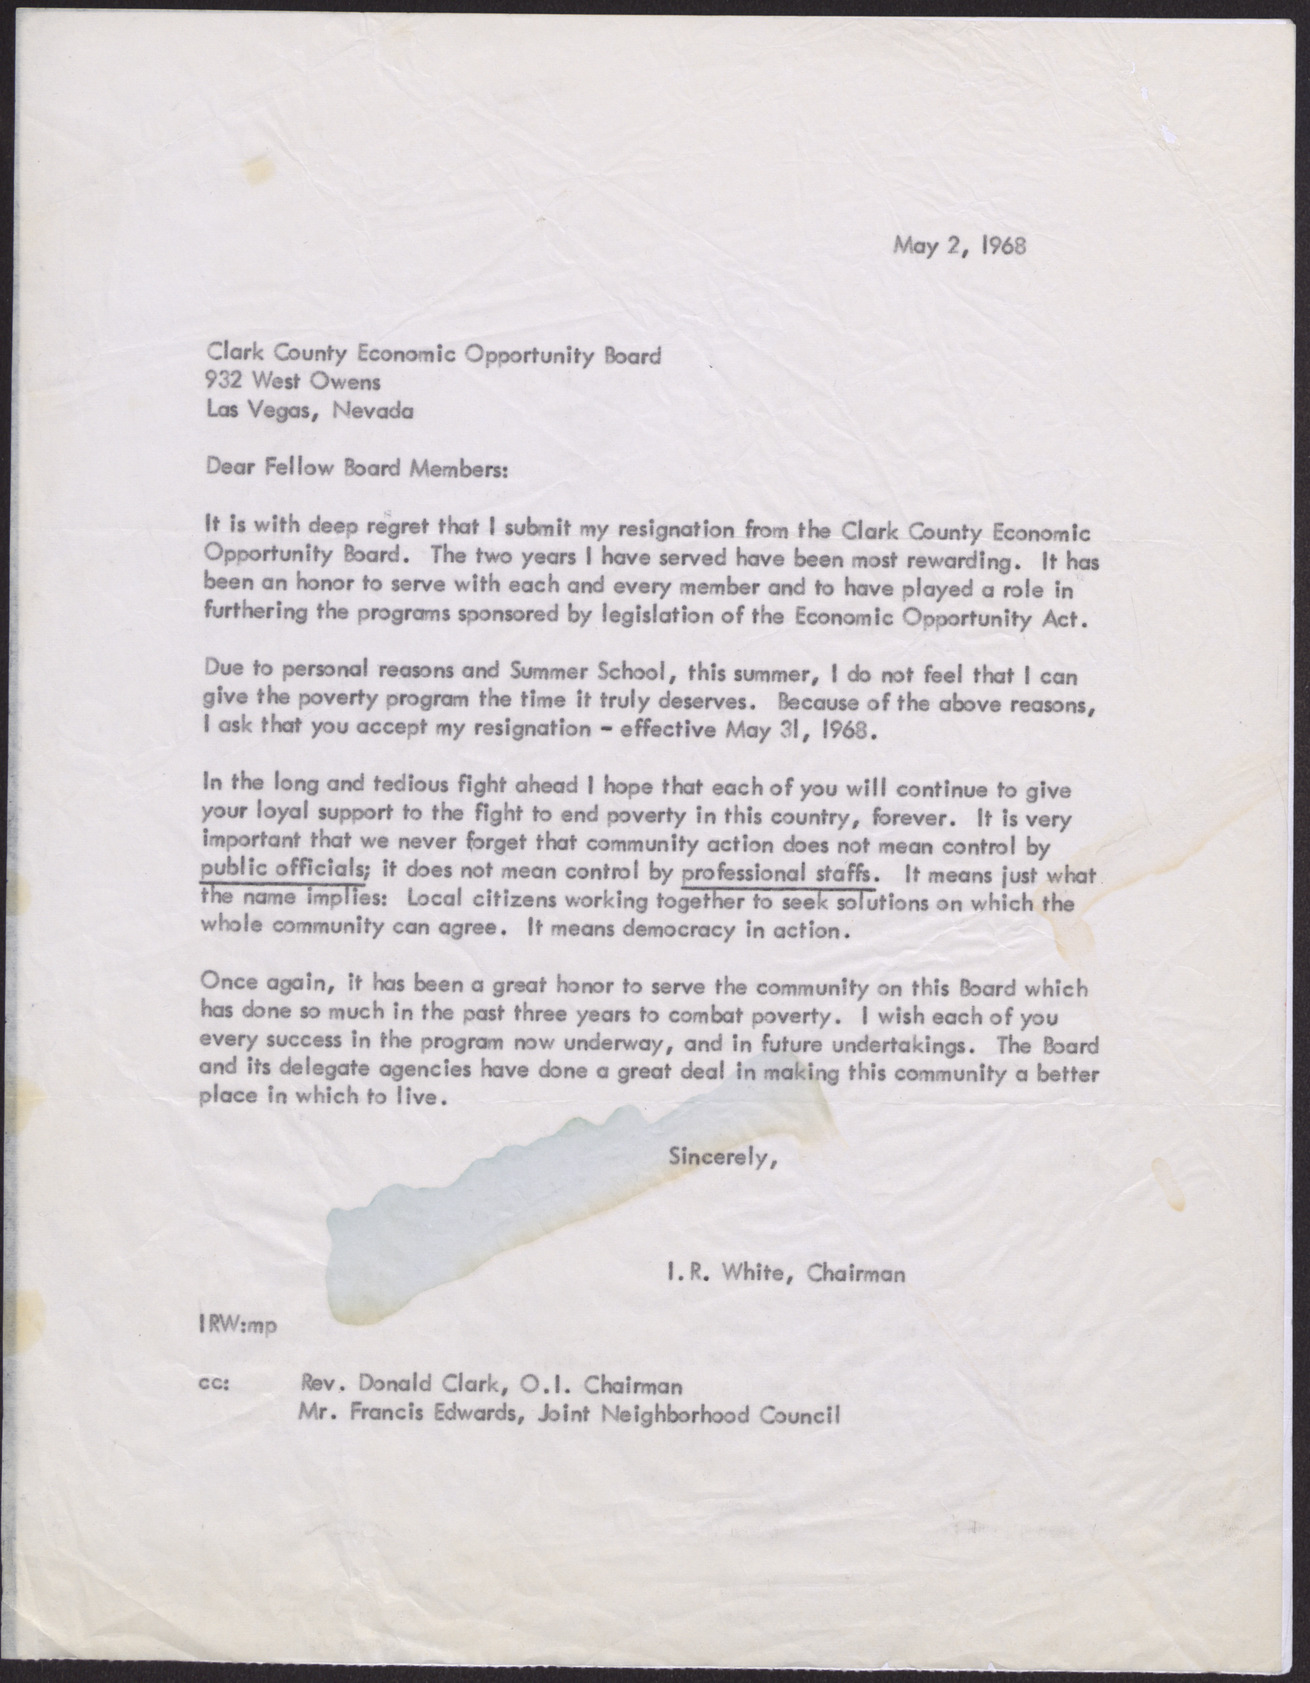 Letter to EOB Board Members from I. R. White, May 2, 1968